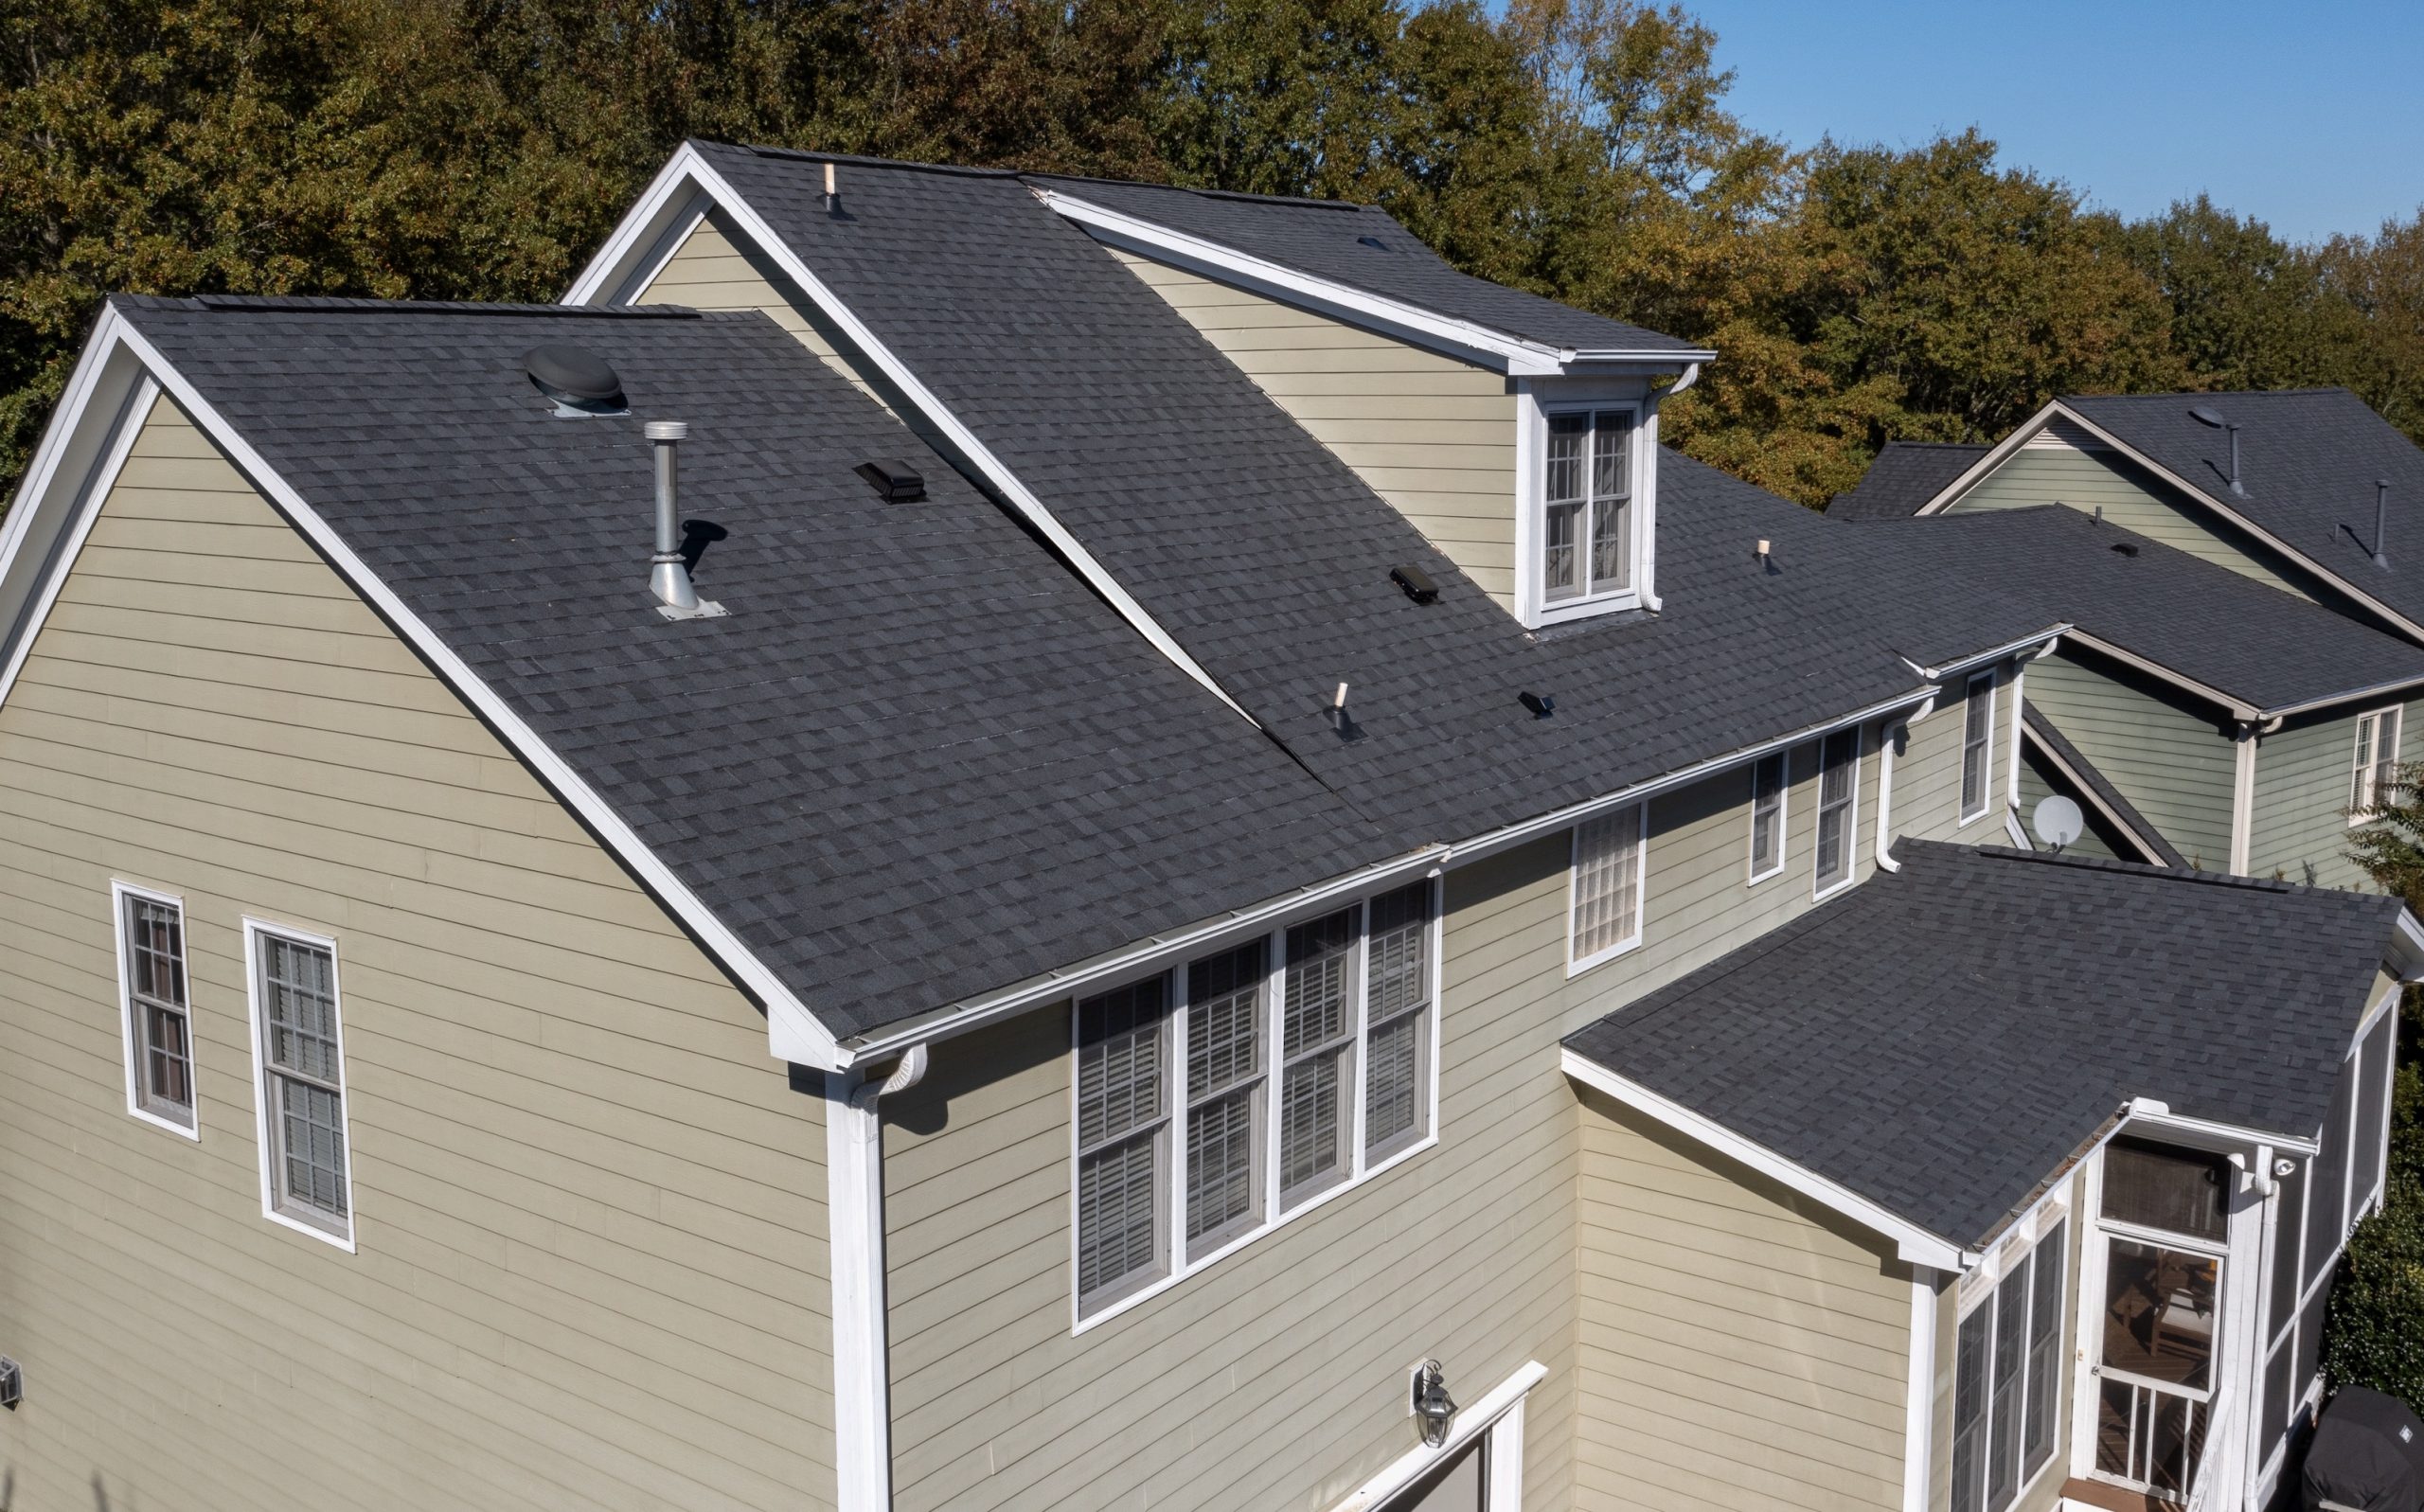 Photograph of a newly installed roof with Certainteed asphalt shingles in Moire black color